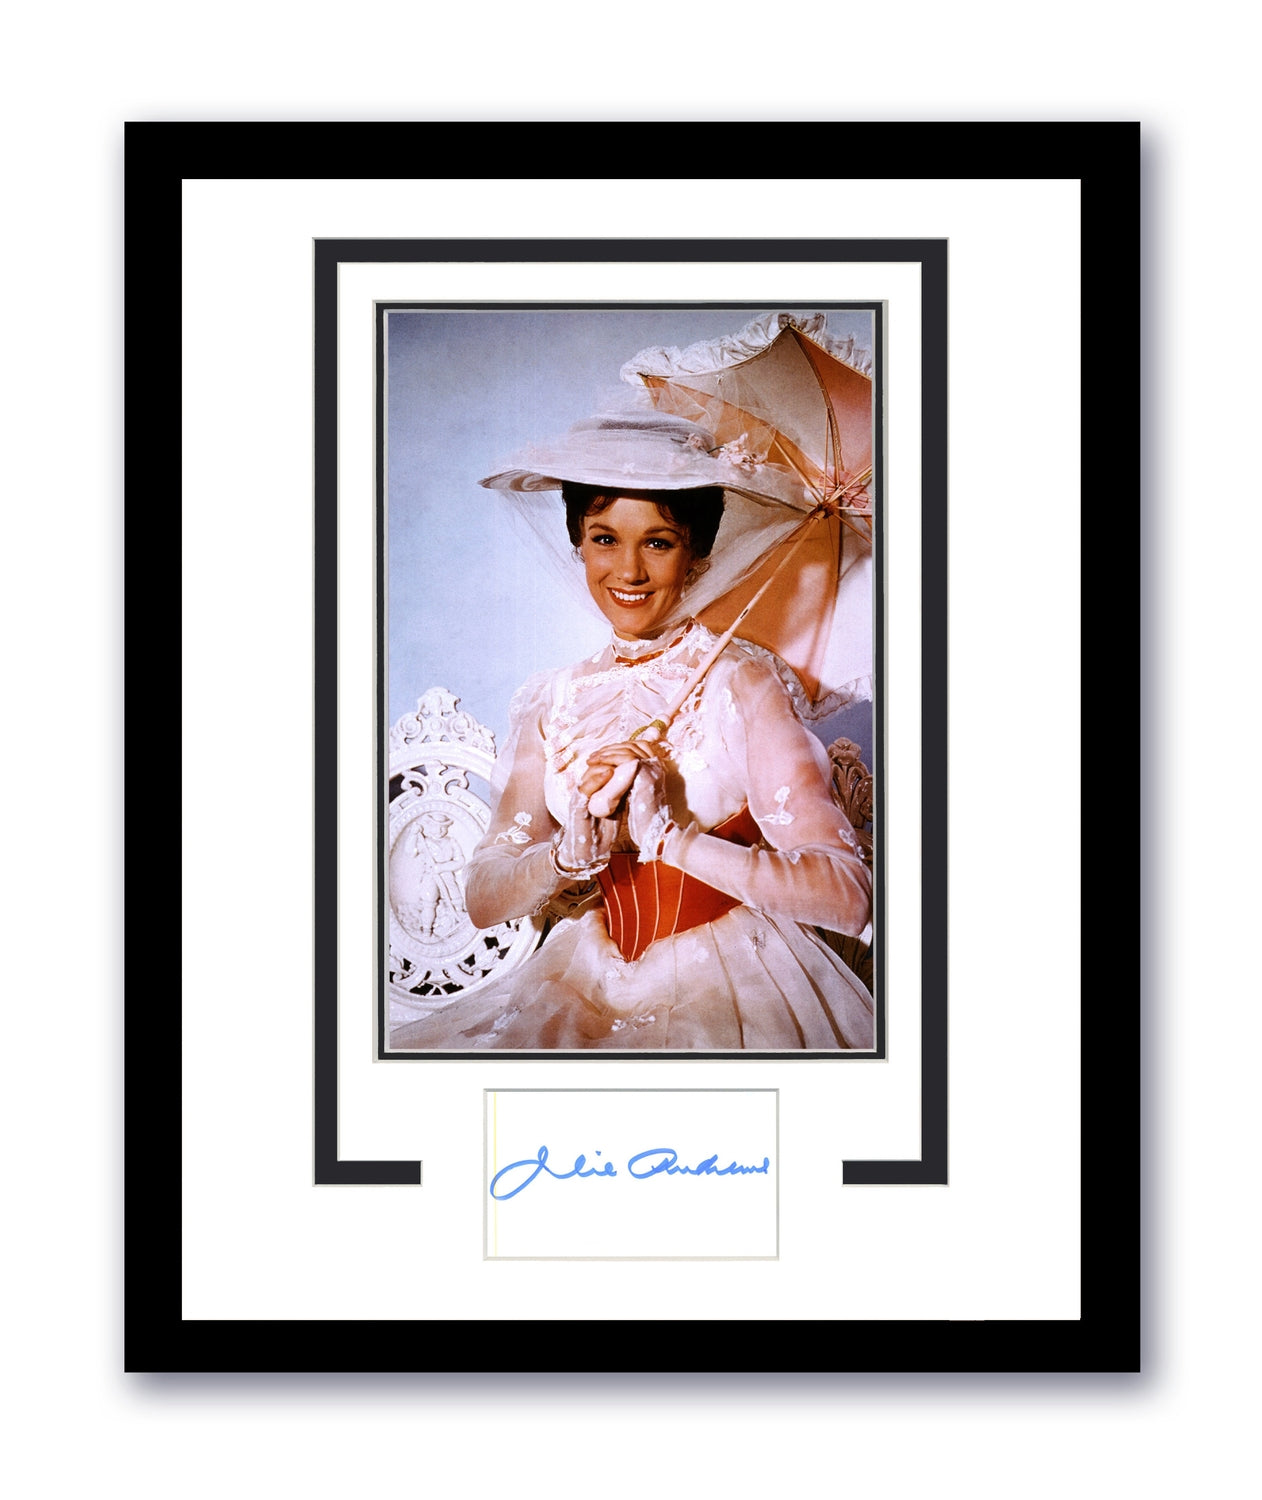 Julie Andrews Signed Cut 11x14 The Sounds of Music Autographed Authentic ACOA 4